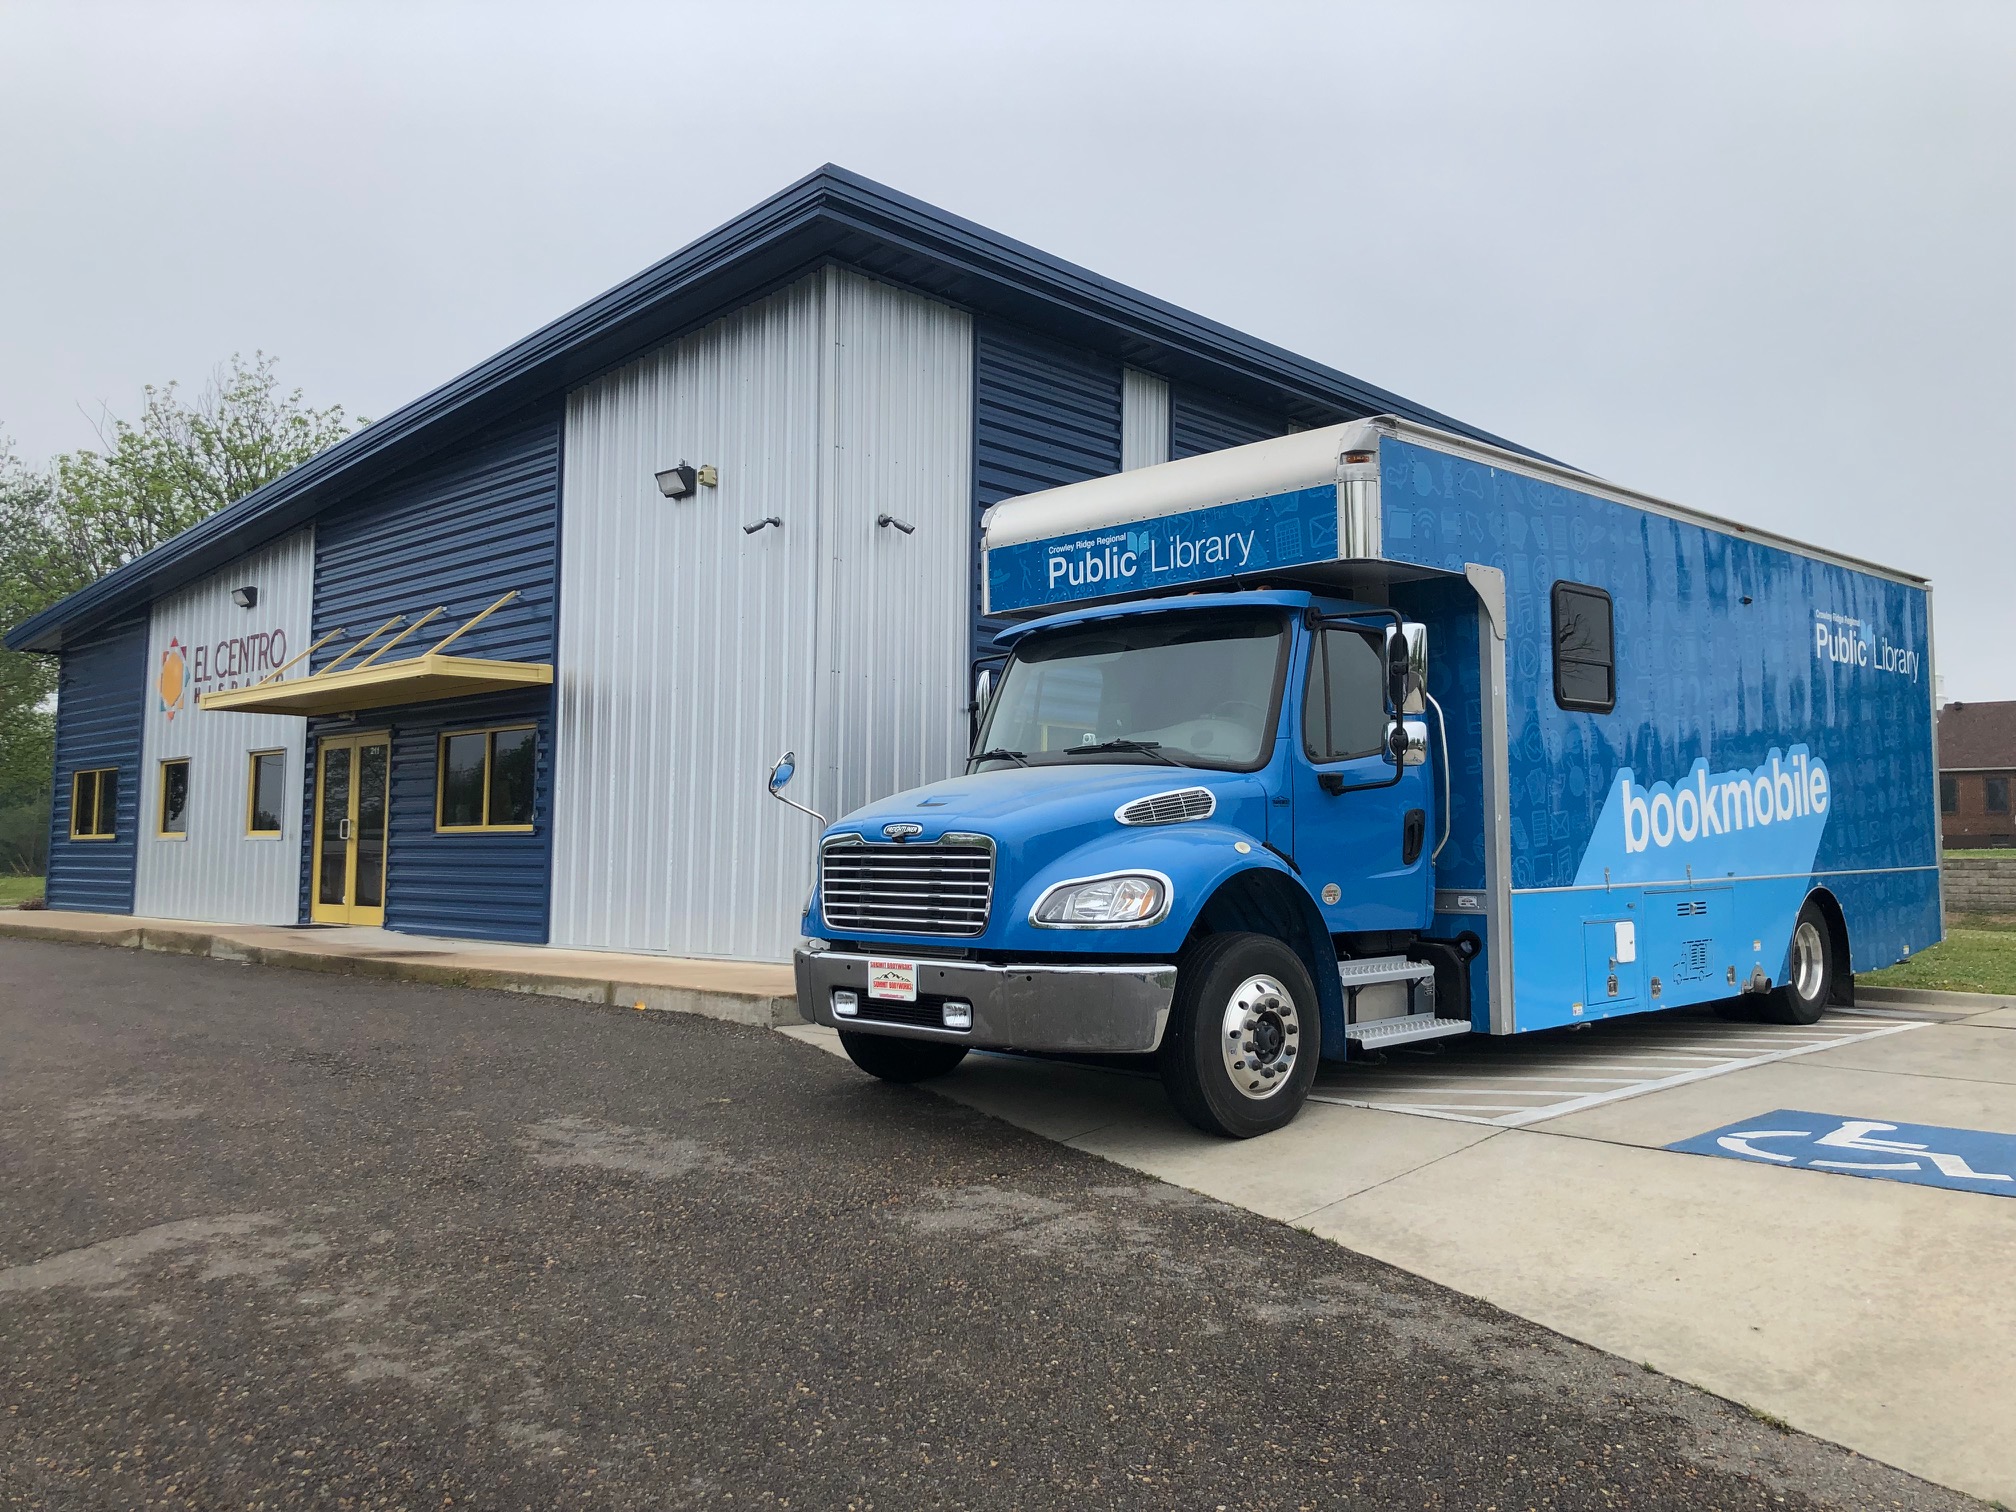 The Bookmobile, a large blue bus used as a traveling library, outside of the Jonesboro Hispanic Center